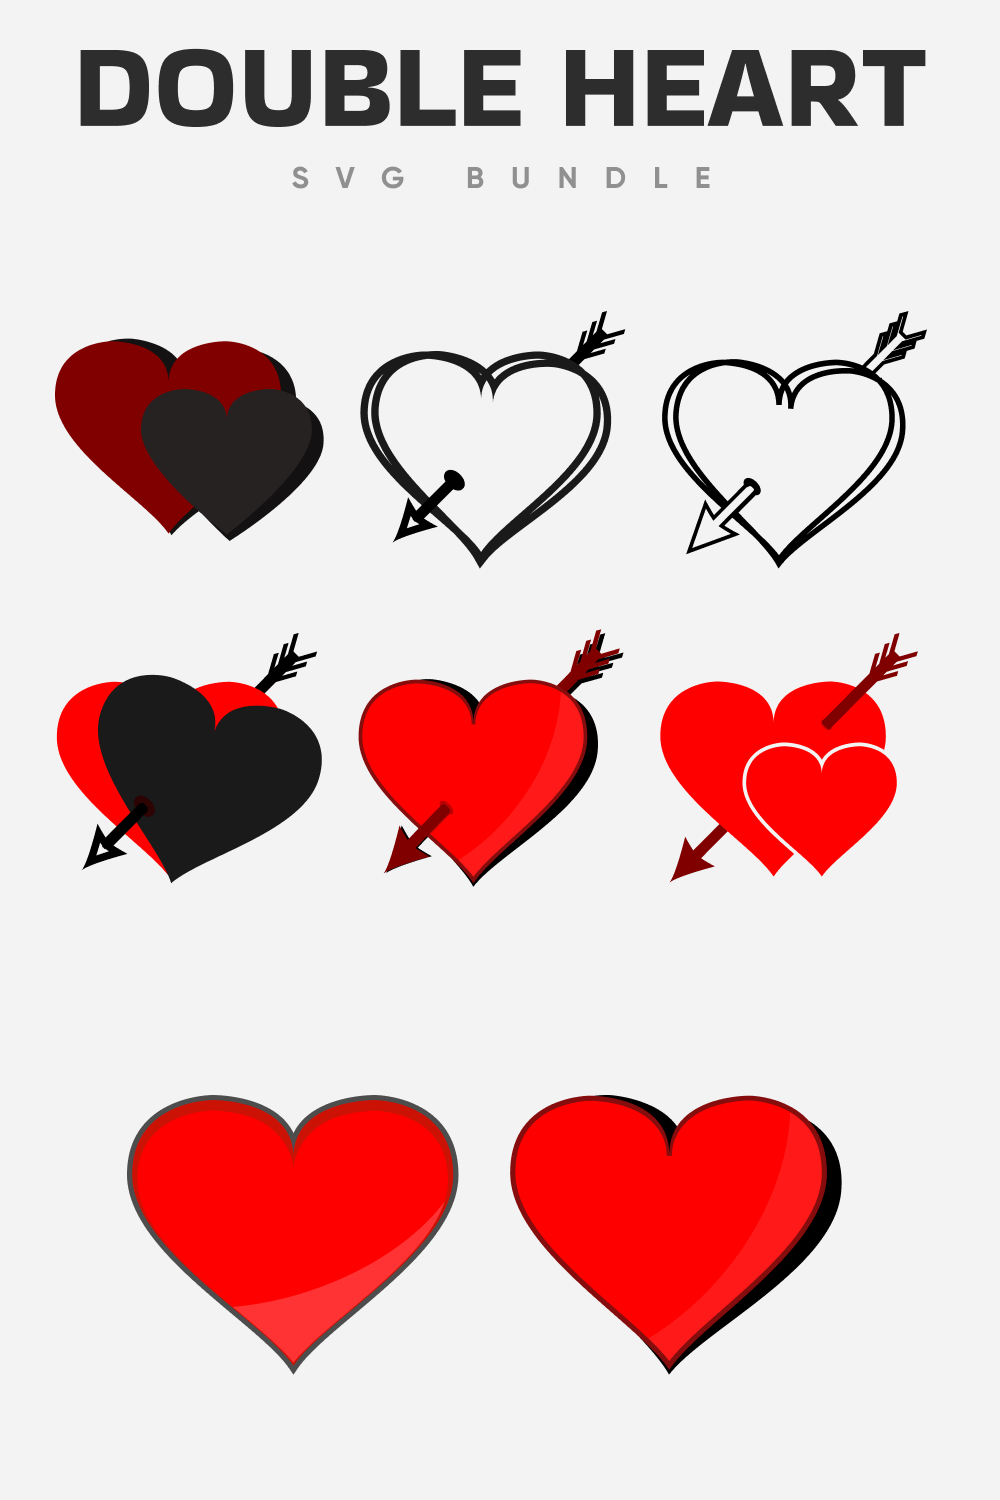 Double hearts in different colors connected by love.